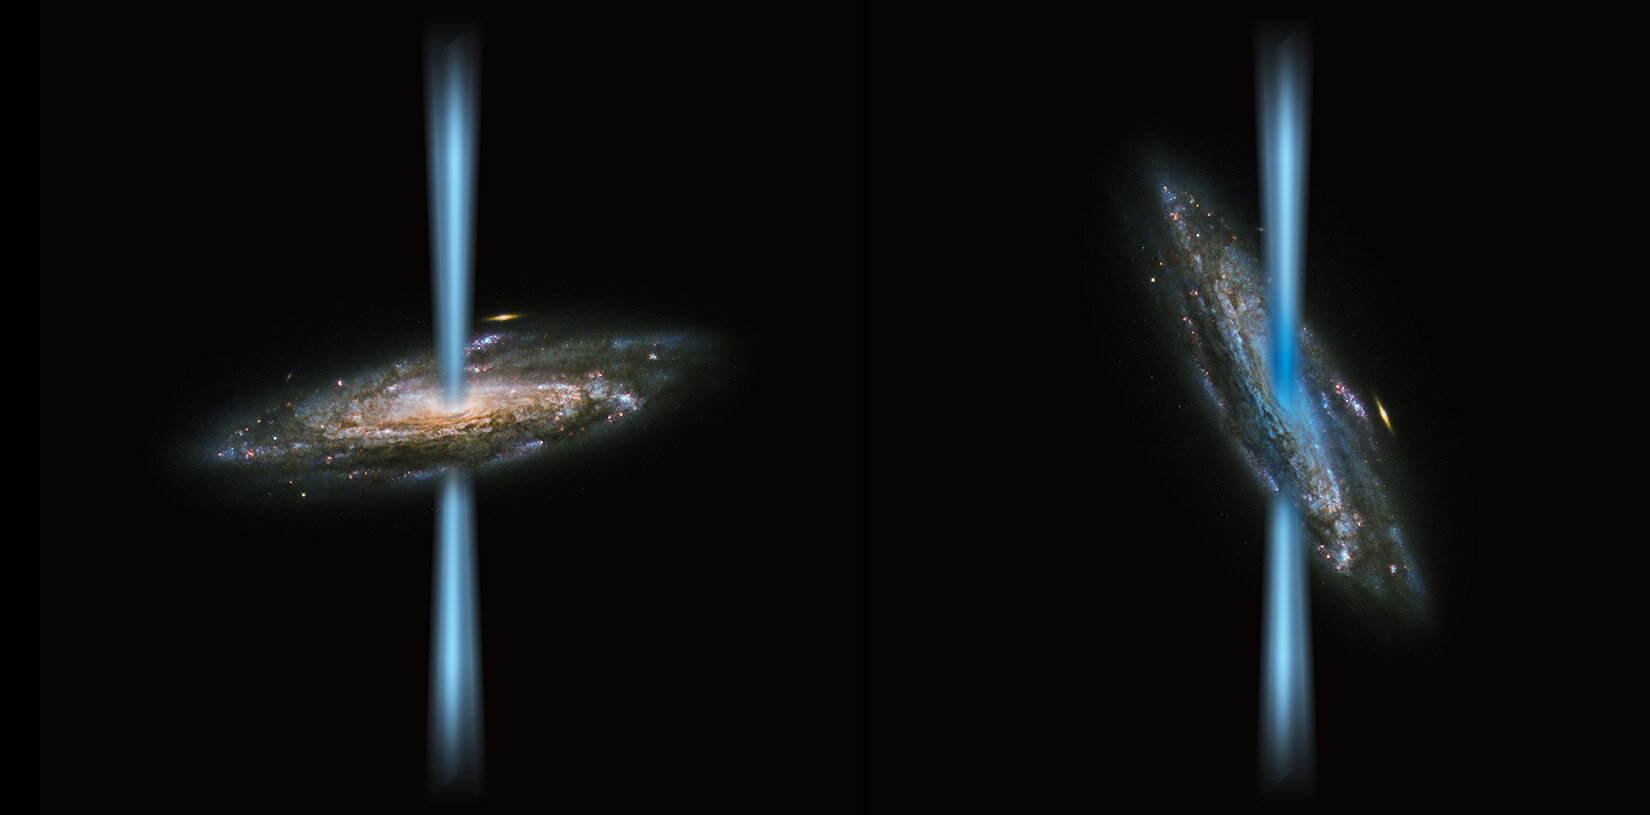 Young Galaxies Are Flat, But Old Ones Are More Blobby